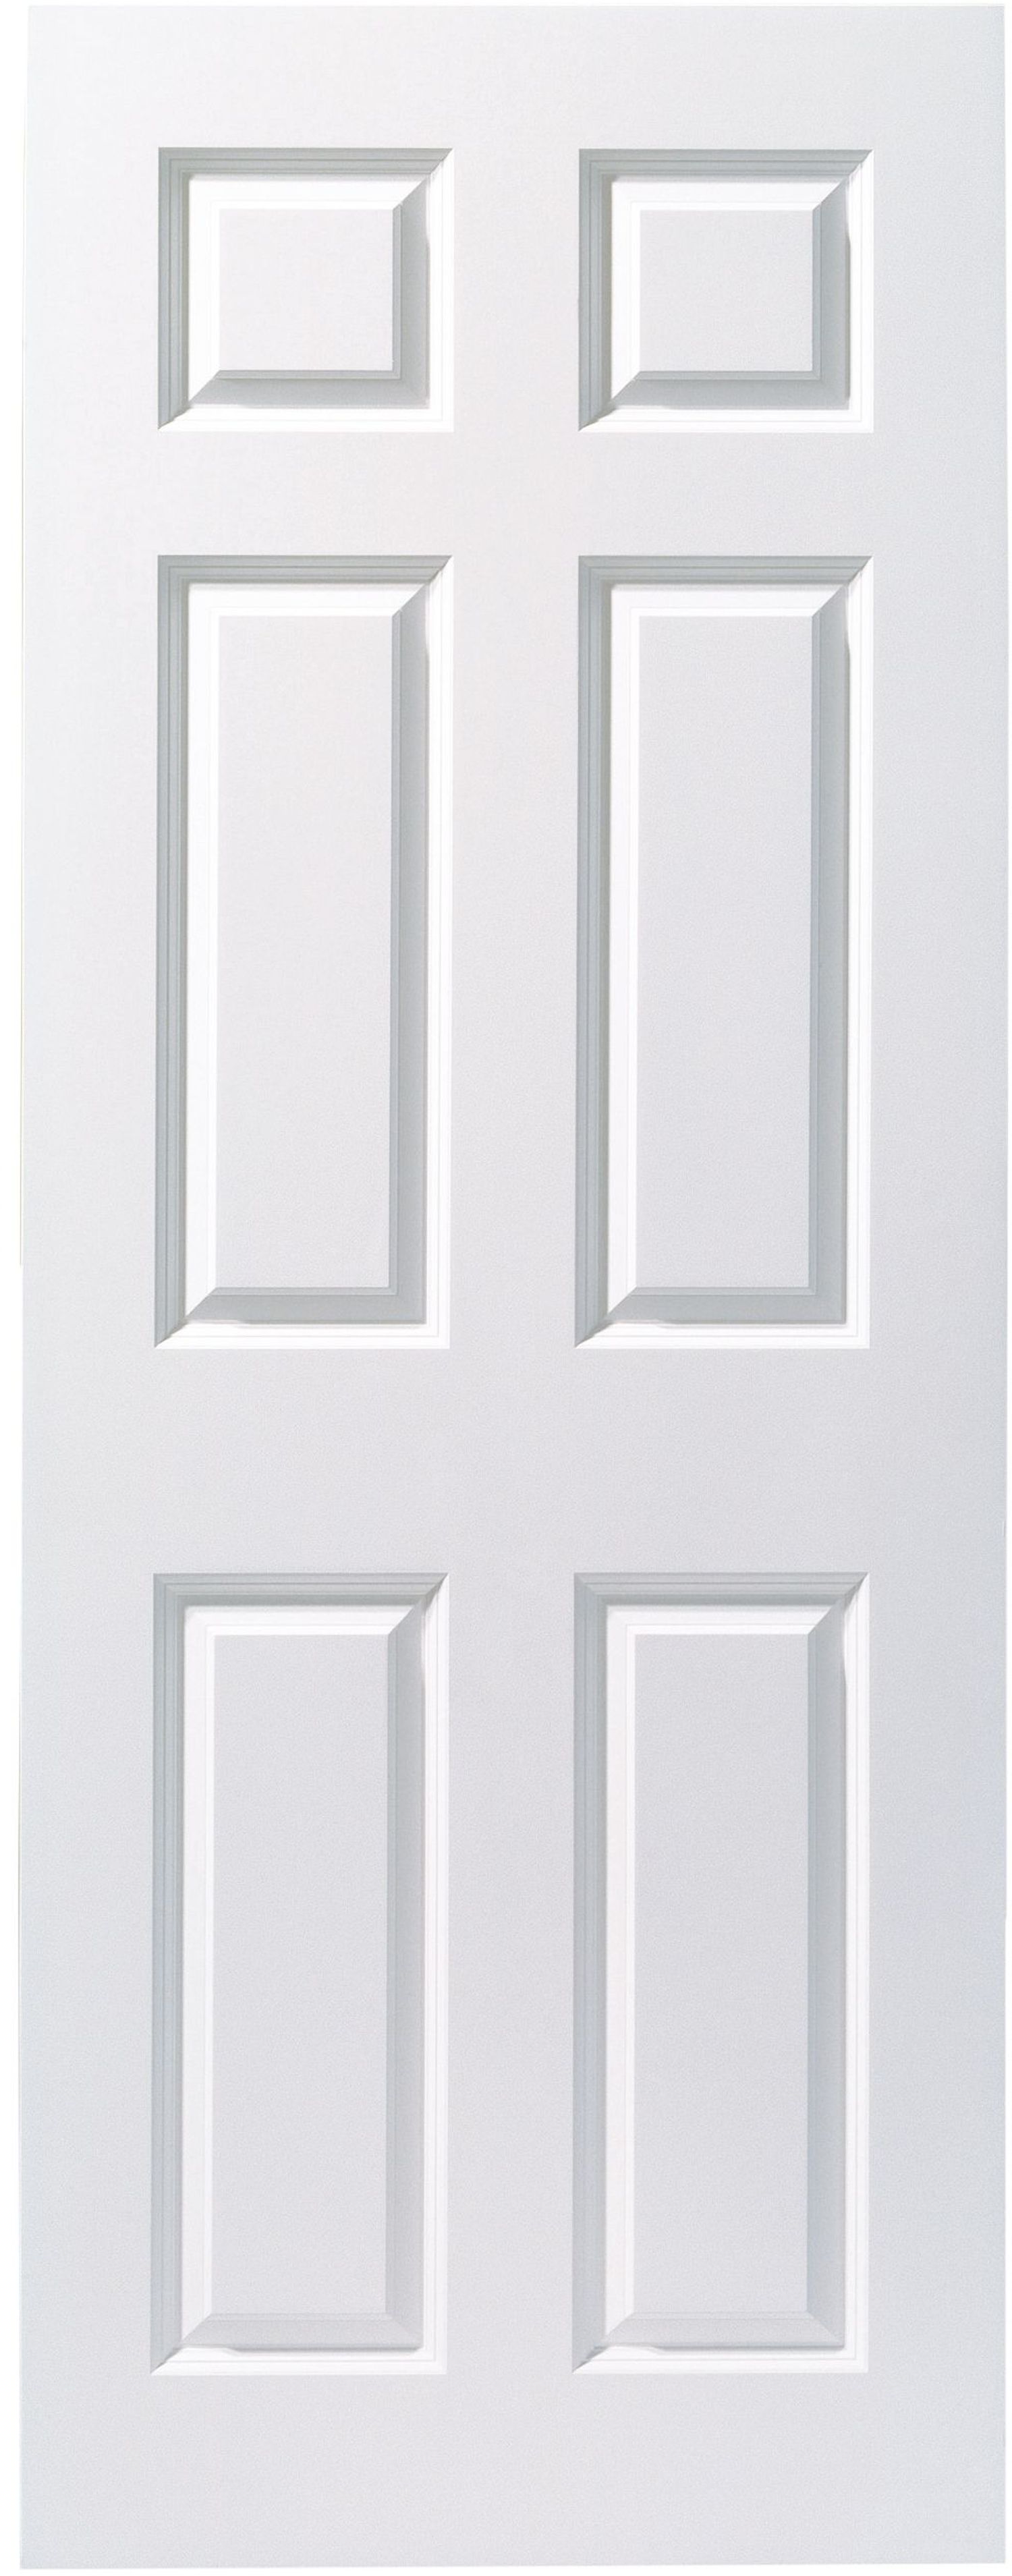 Wickes Woburn White Smooth Moulded 6 Panel Internal Fire Door - 1981mm x 686mm